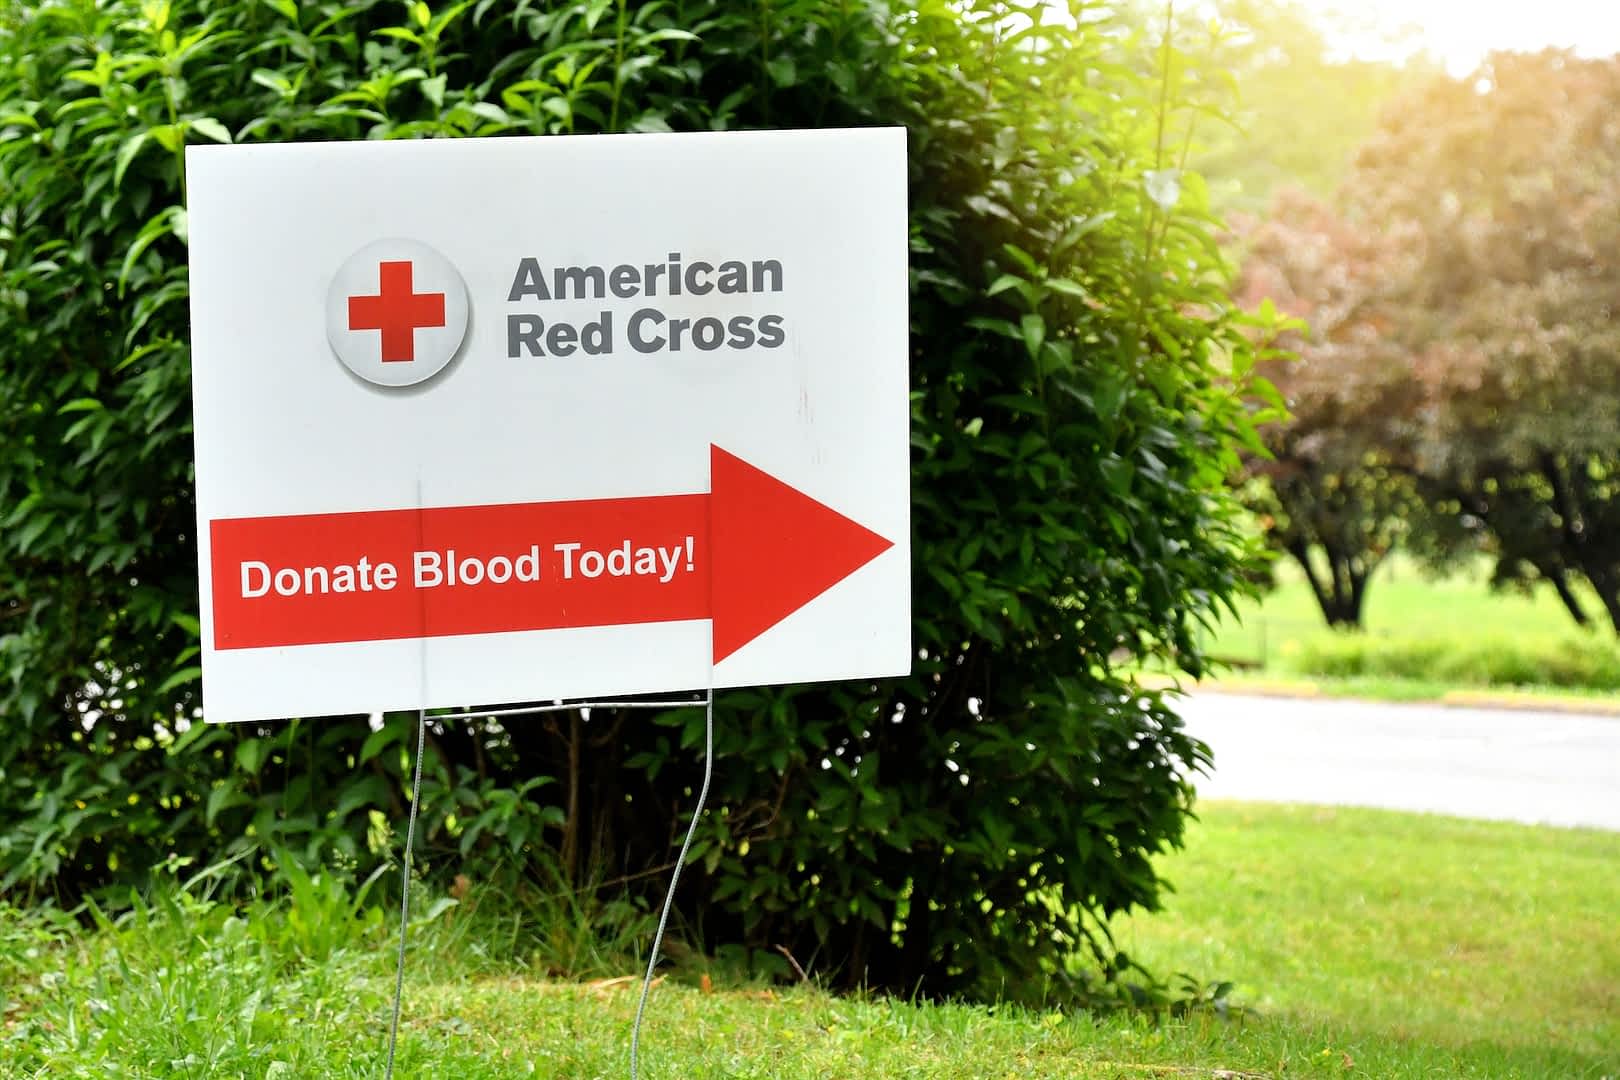 Blood drive, American Red Cross, Donate Blood Today sign pointing to donation site, blood donors